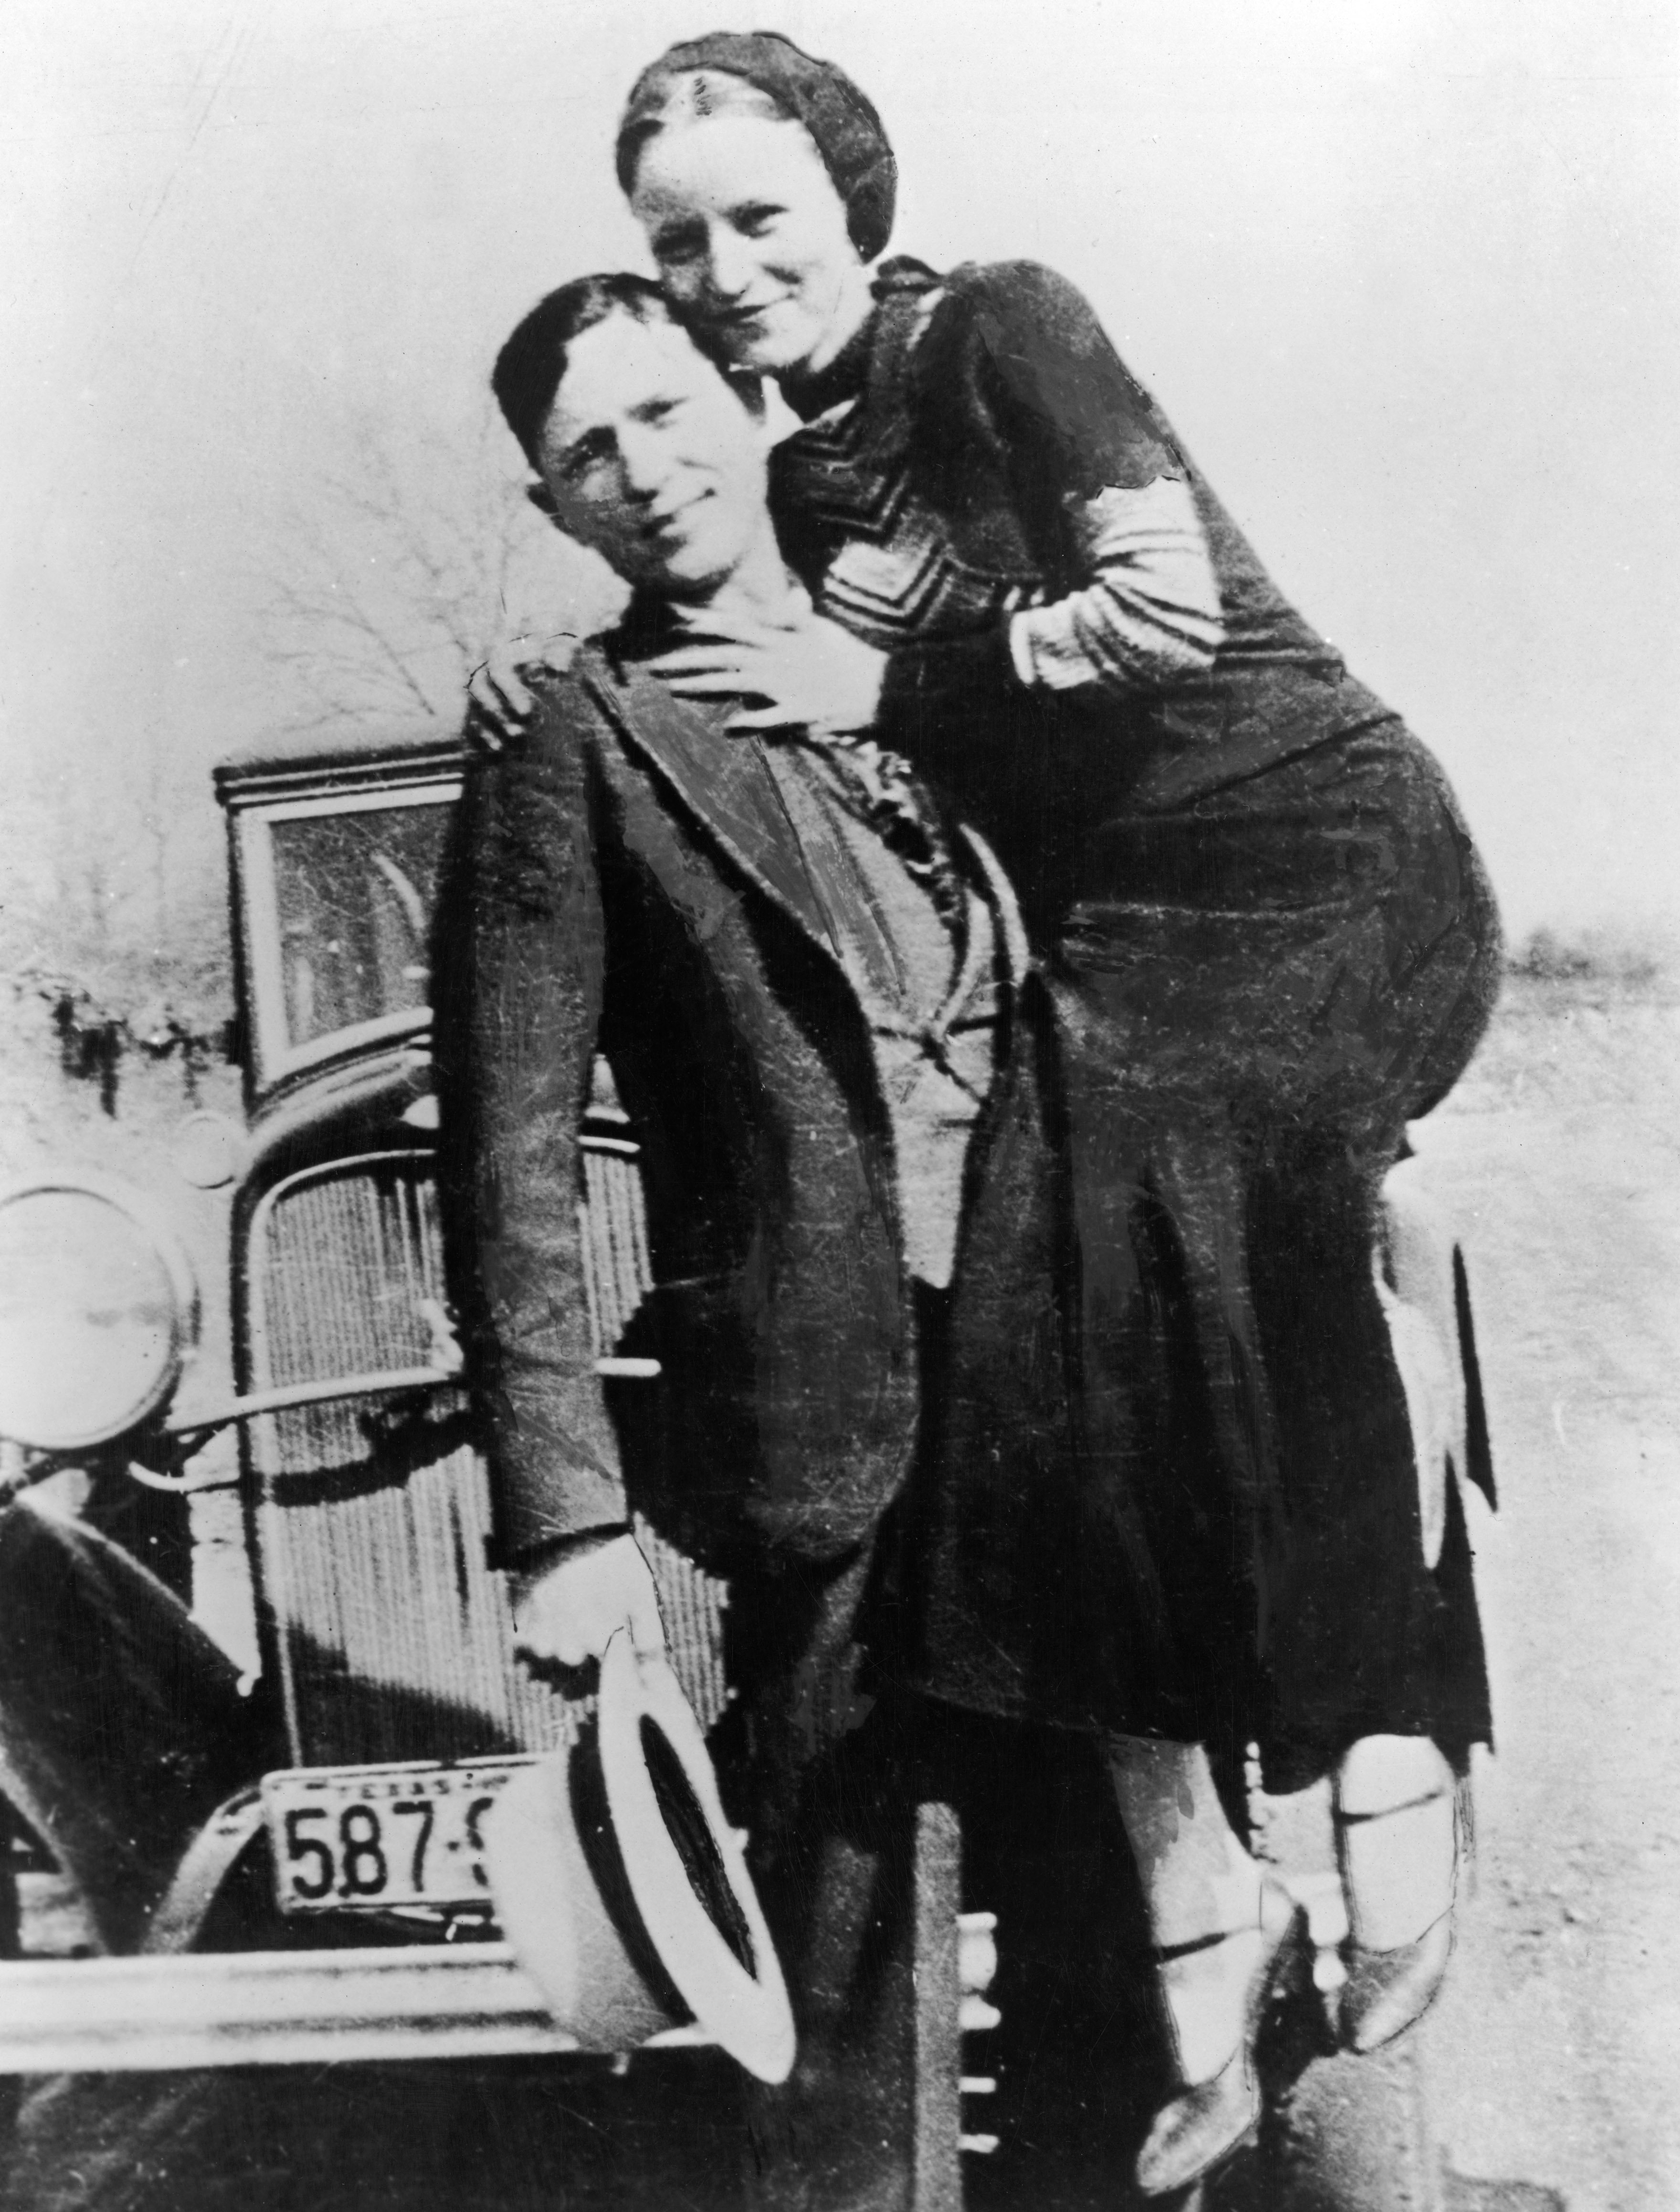 003-bonnie-and-clyde-theredlist.jpg